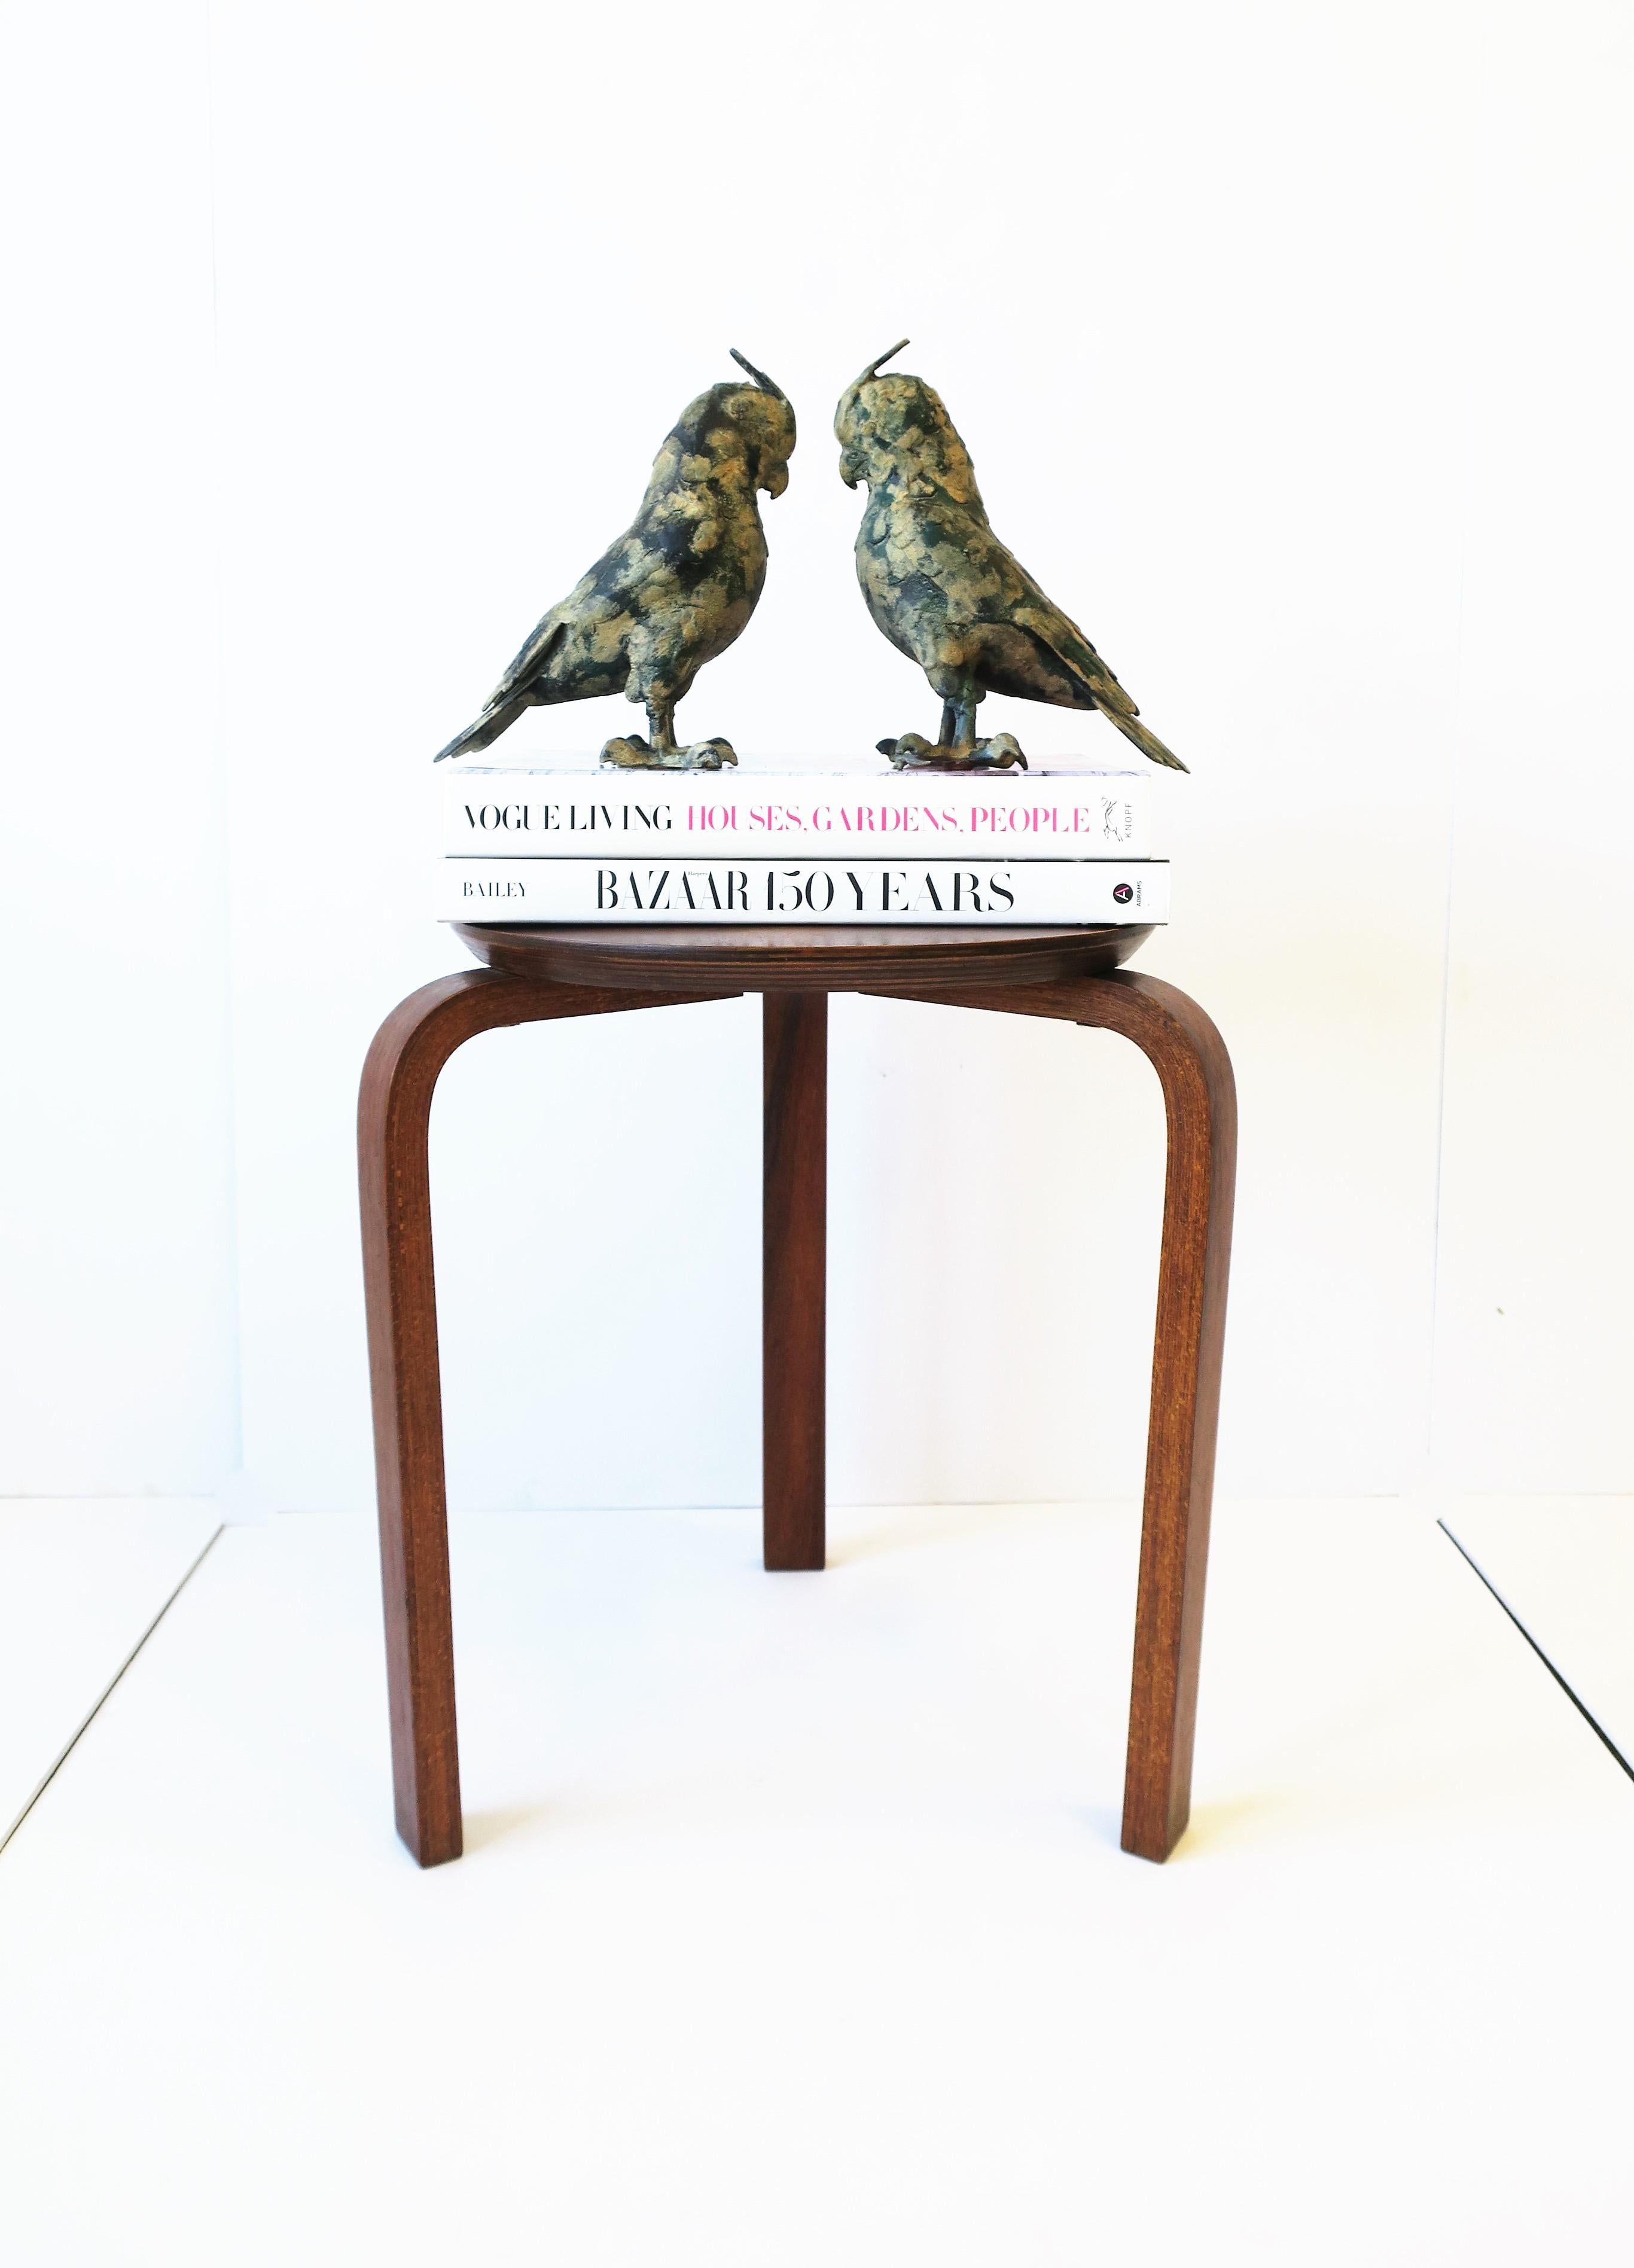 A substantial and striking pair of vintage parrot bird sculptures made of iron and hand painted in black, tan and hunter green hues. Each hold all the true details of a parrot such as their crest (head feathers), feet/claws, bill/beak, and elaborate